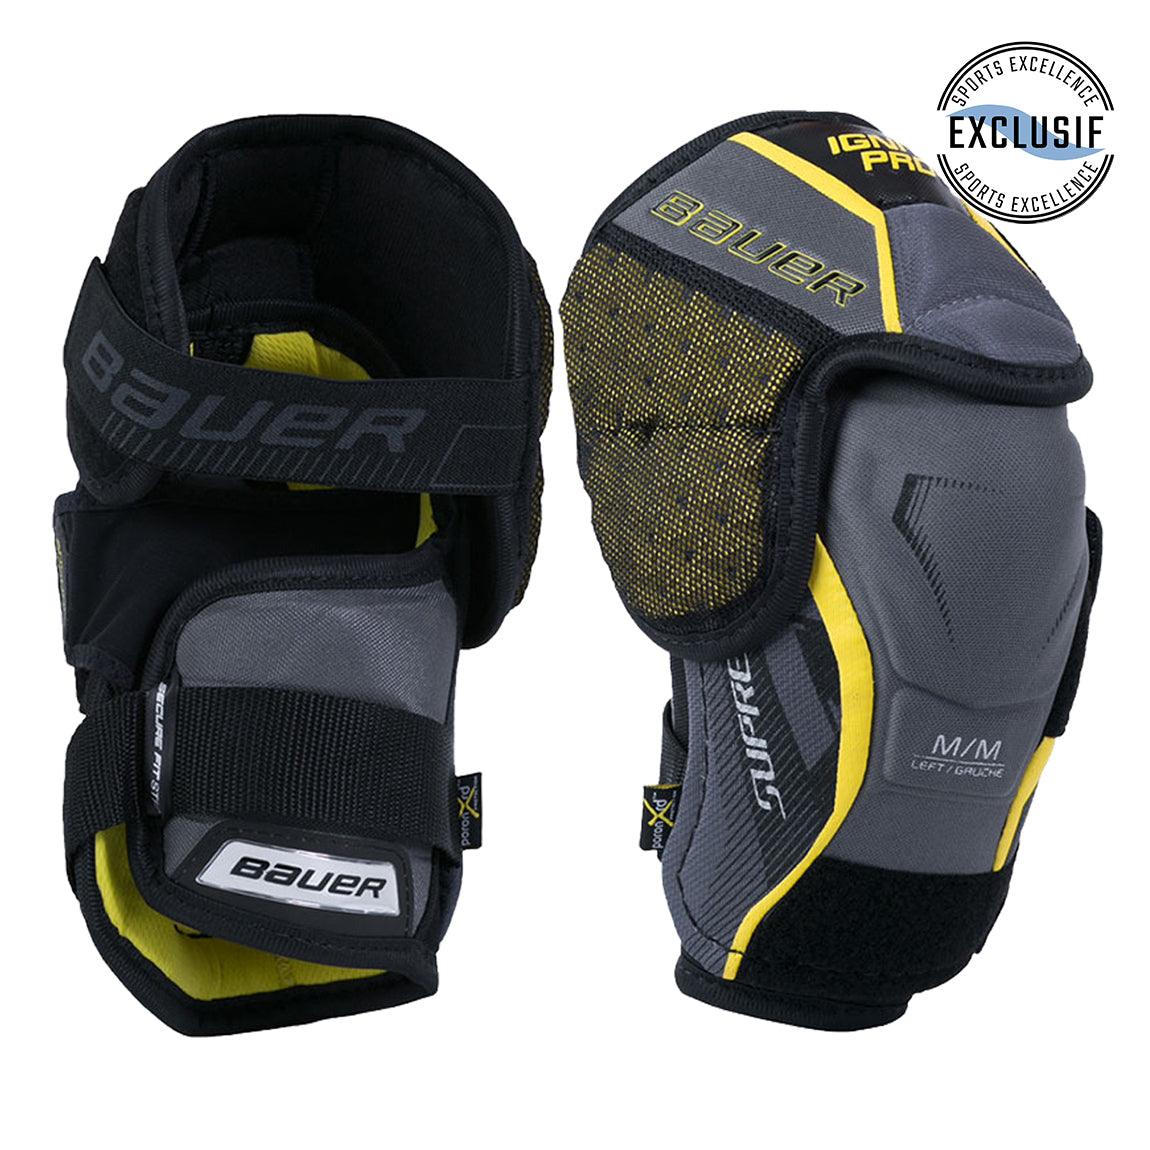 Supreme Ignite Pro Plus Hockey Elbow Pads by Bauer